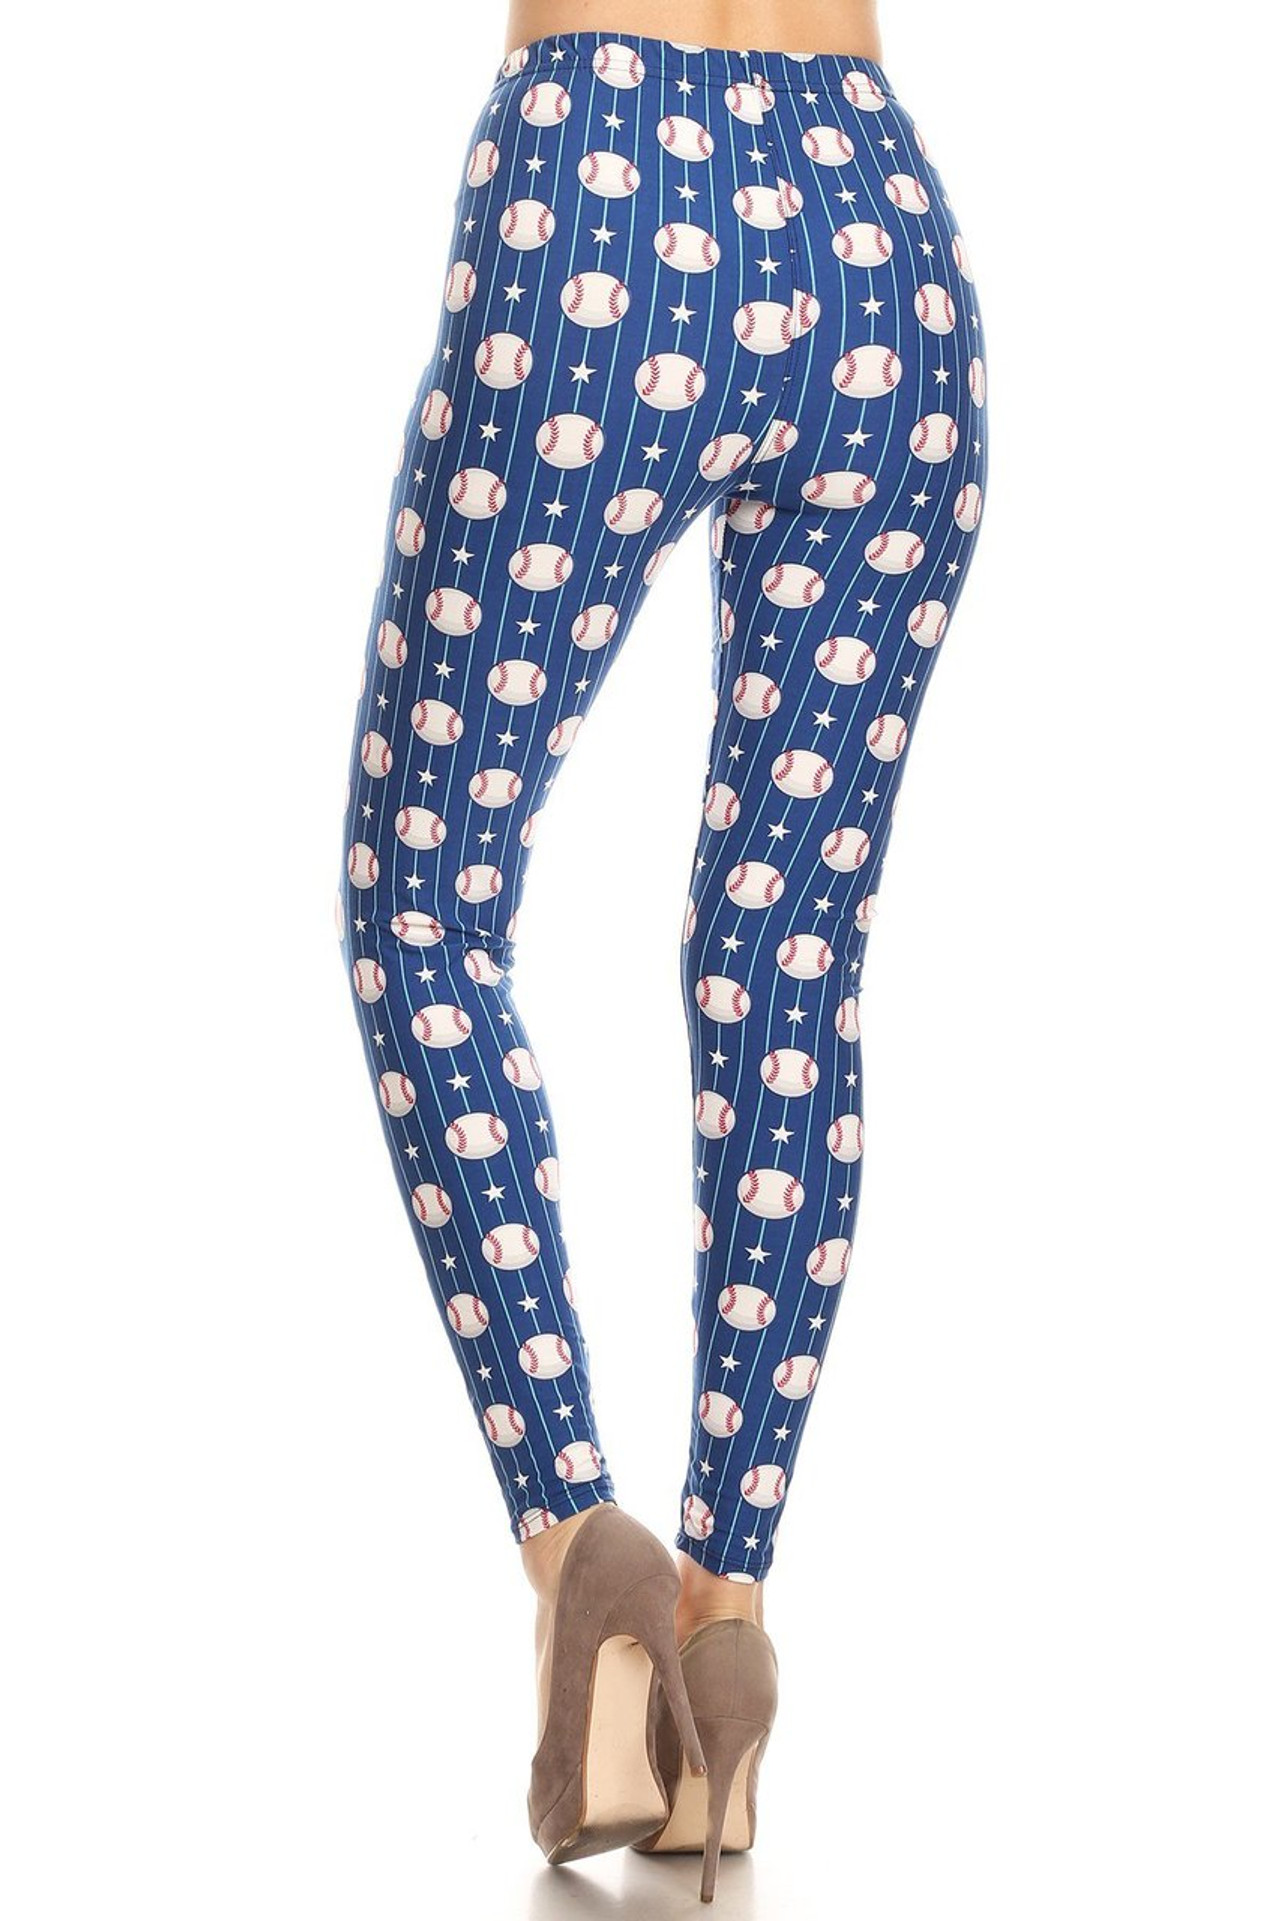 Buttery Smooth Baseball Extra Plus Size Leggings - 3X-5X